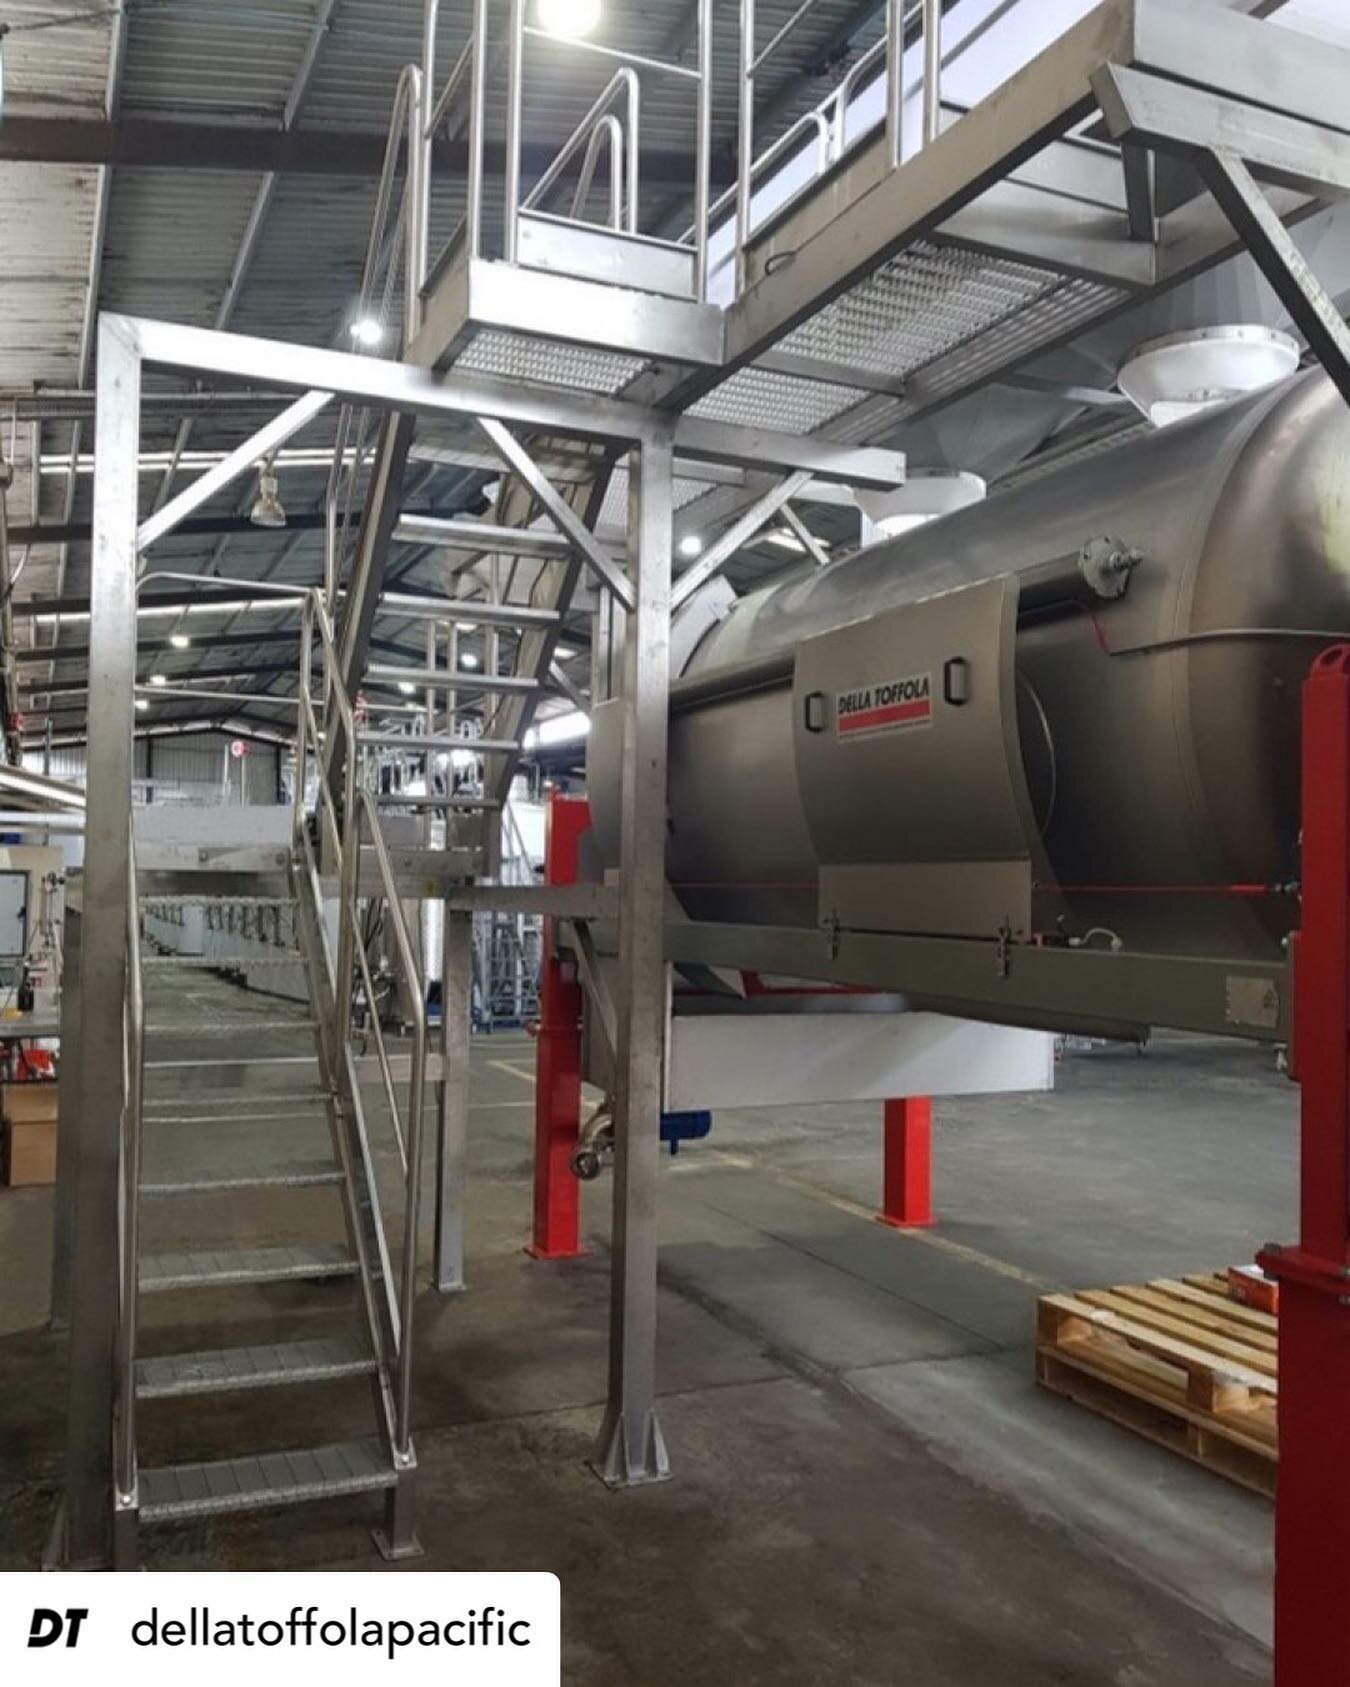 #repost &bull; @dellatoffolapacific Installation of our amazing central membrane press (with the lot!) in Tassie, timed perfectly before vintage! For more info about our range of winery presses and equipment, please contact us via info@dtpacific.com 